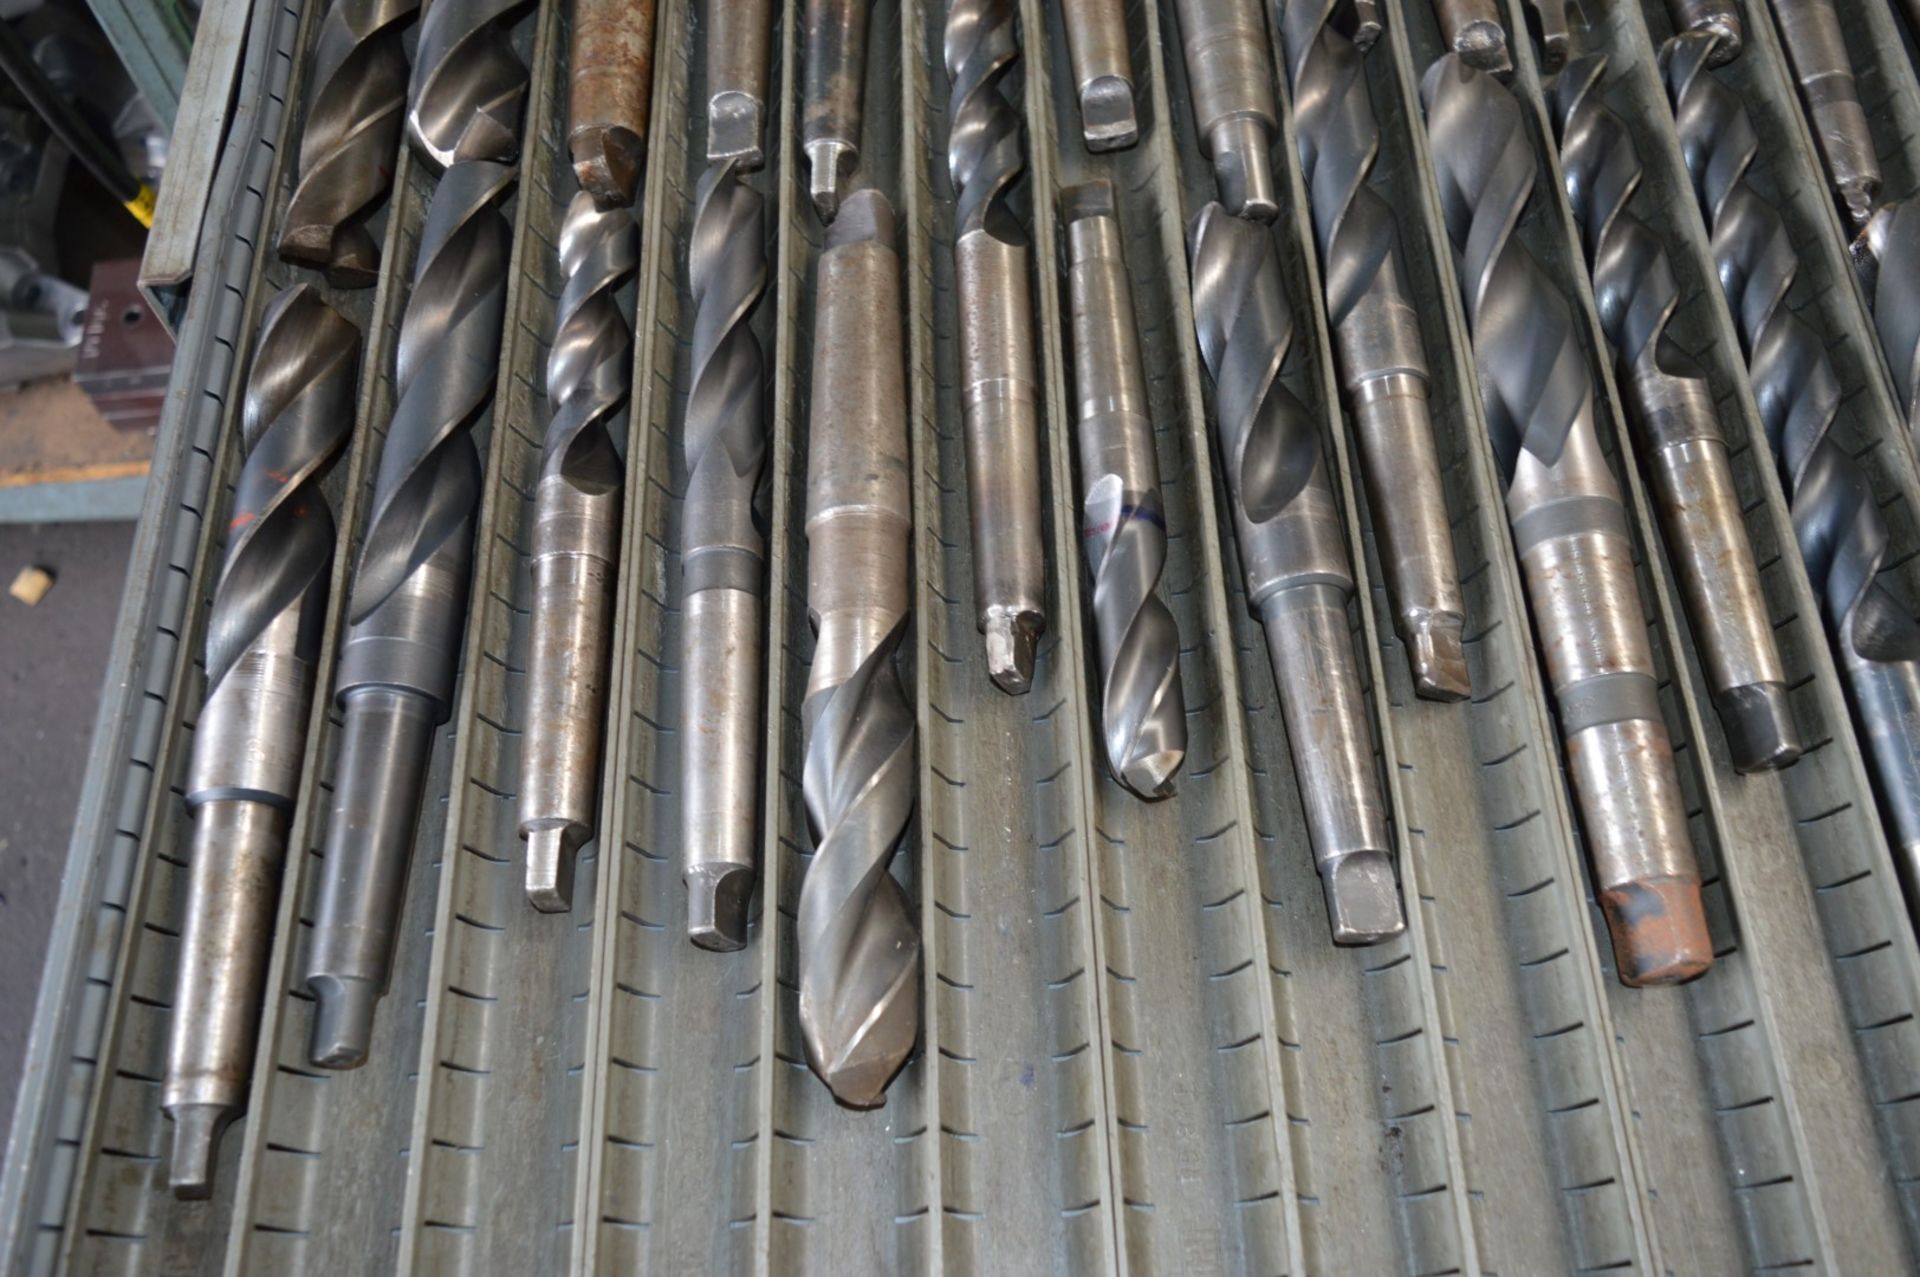 1 x Assorted Lot of Machine Drill Bits - Information to Follow - Please See Pictures Provided - - Image 7 of 8